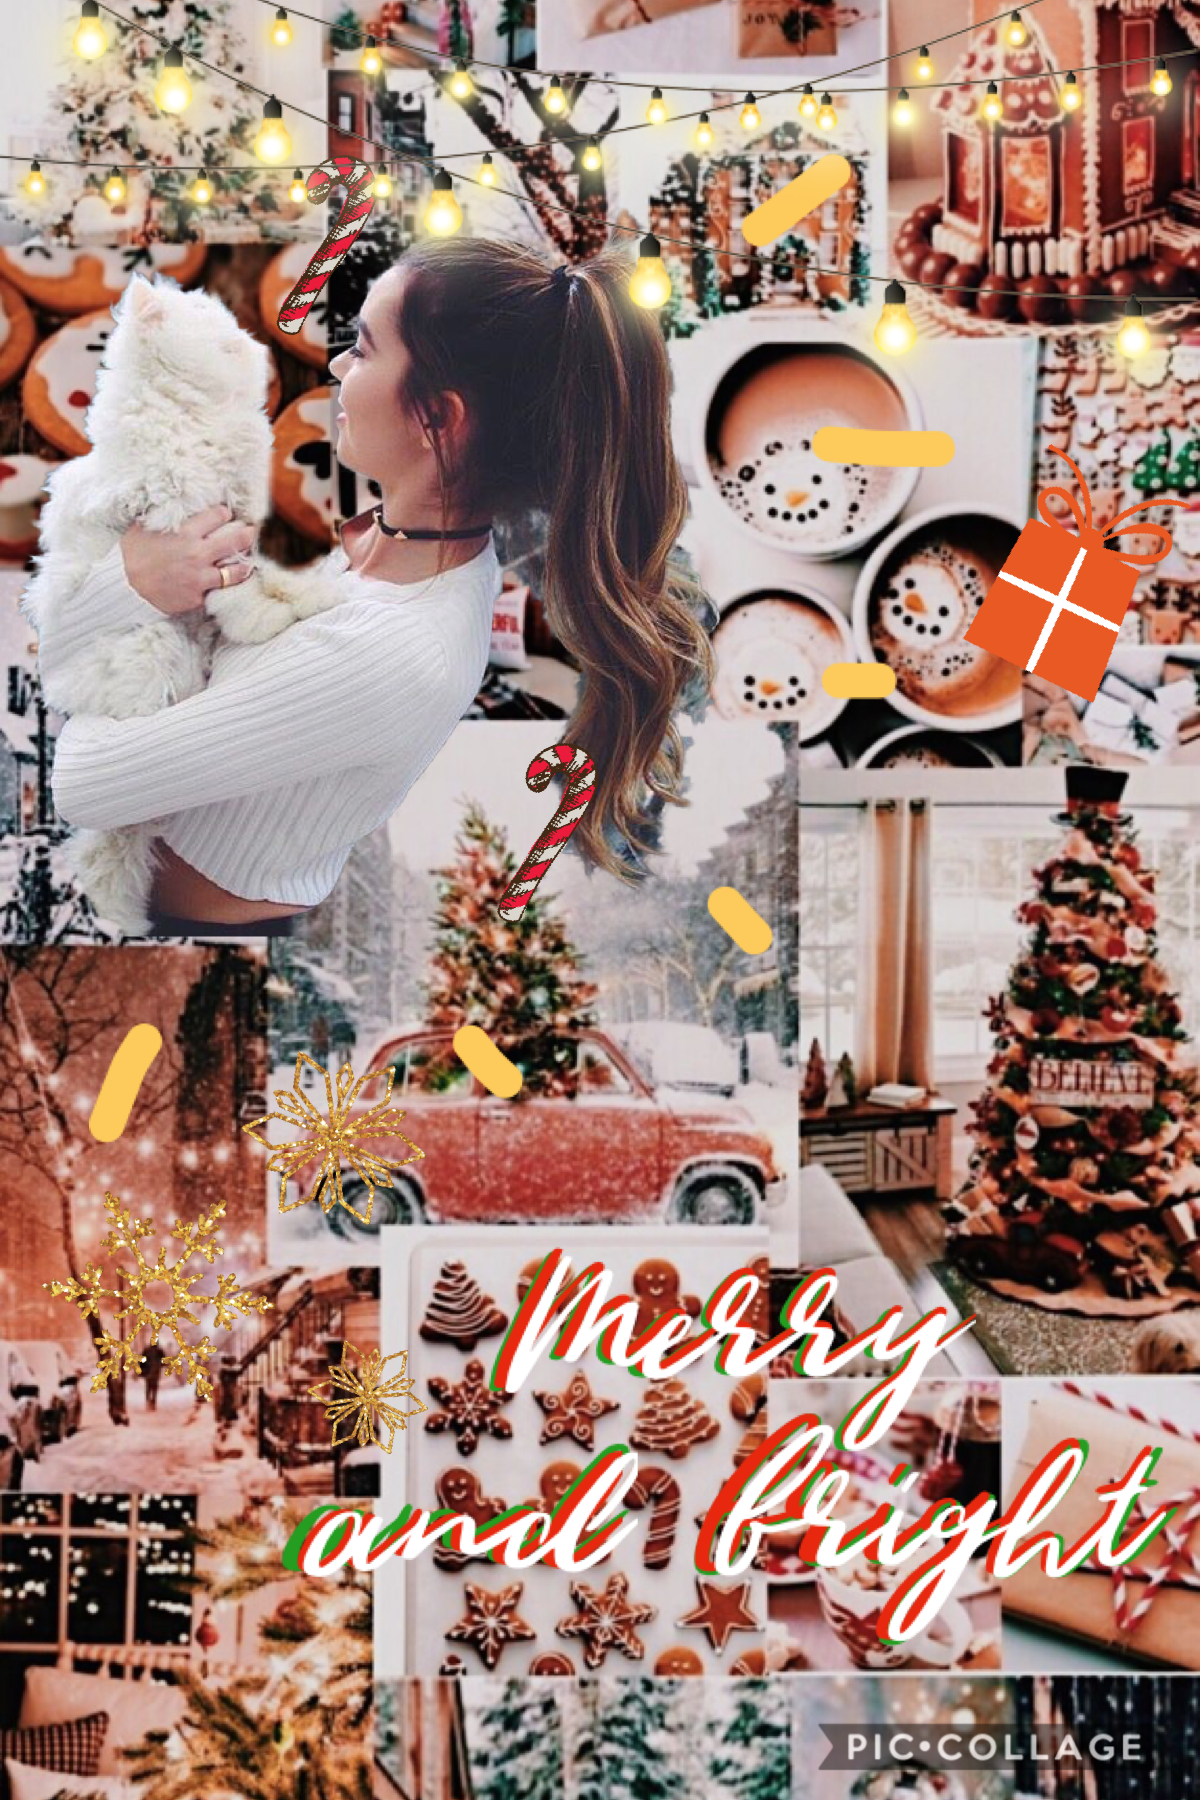 🎄merry christmas eve🎄
it’s Christmas Eve here in Australia so I thought I would post one of my Christmas collages! There’s one tmrw as well!! 
QOTD: What do u want for Christmas?
AOTD: An air diffuser thingy ❤️